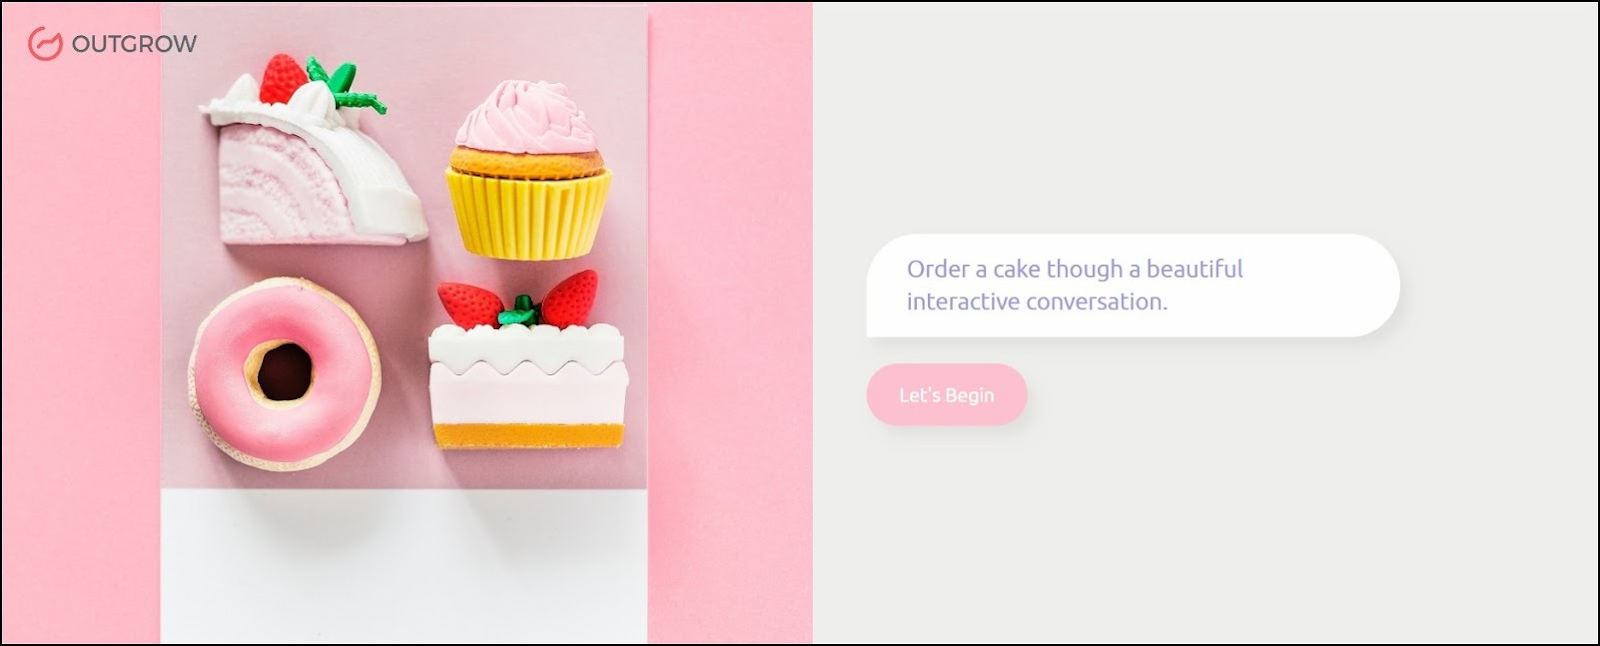 Outgrow's cake ordering chatbot